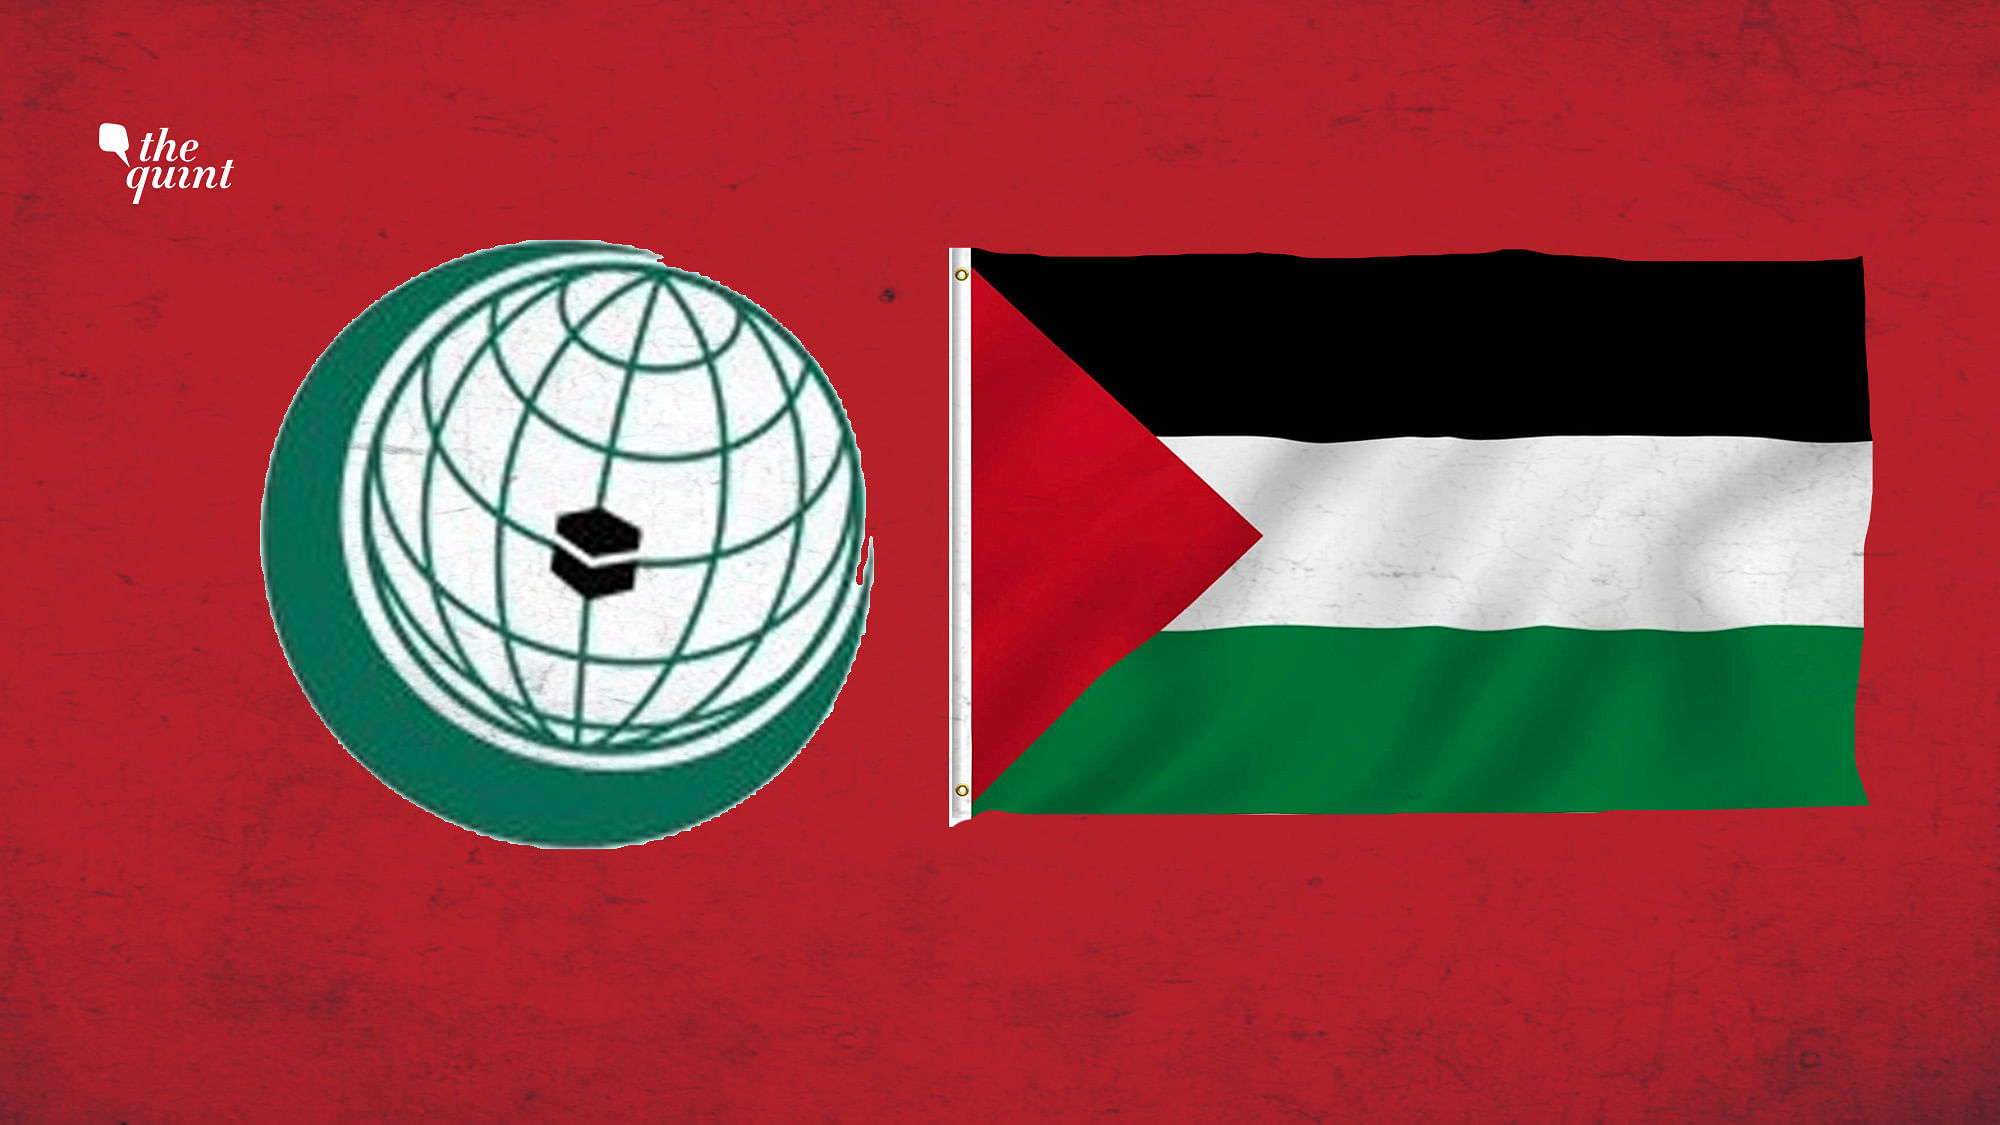 Image of OIC logo (L) and Palestine flag used for representational purposes.